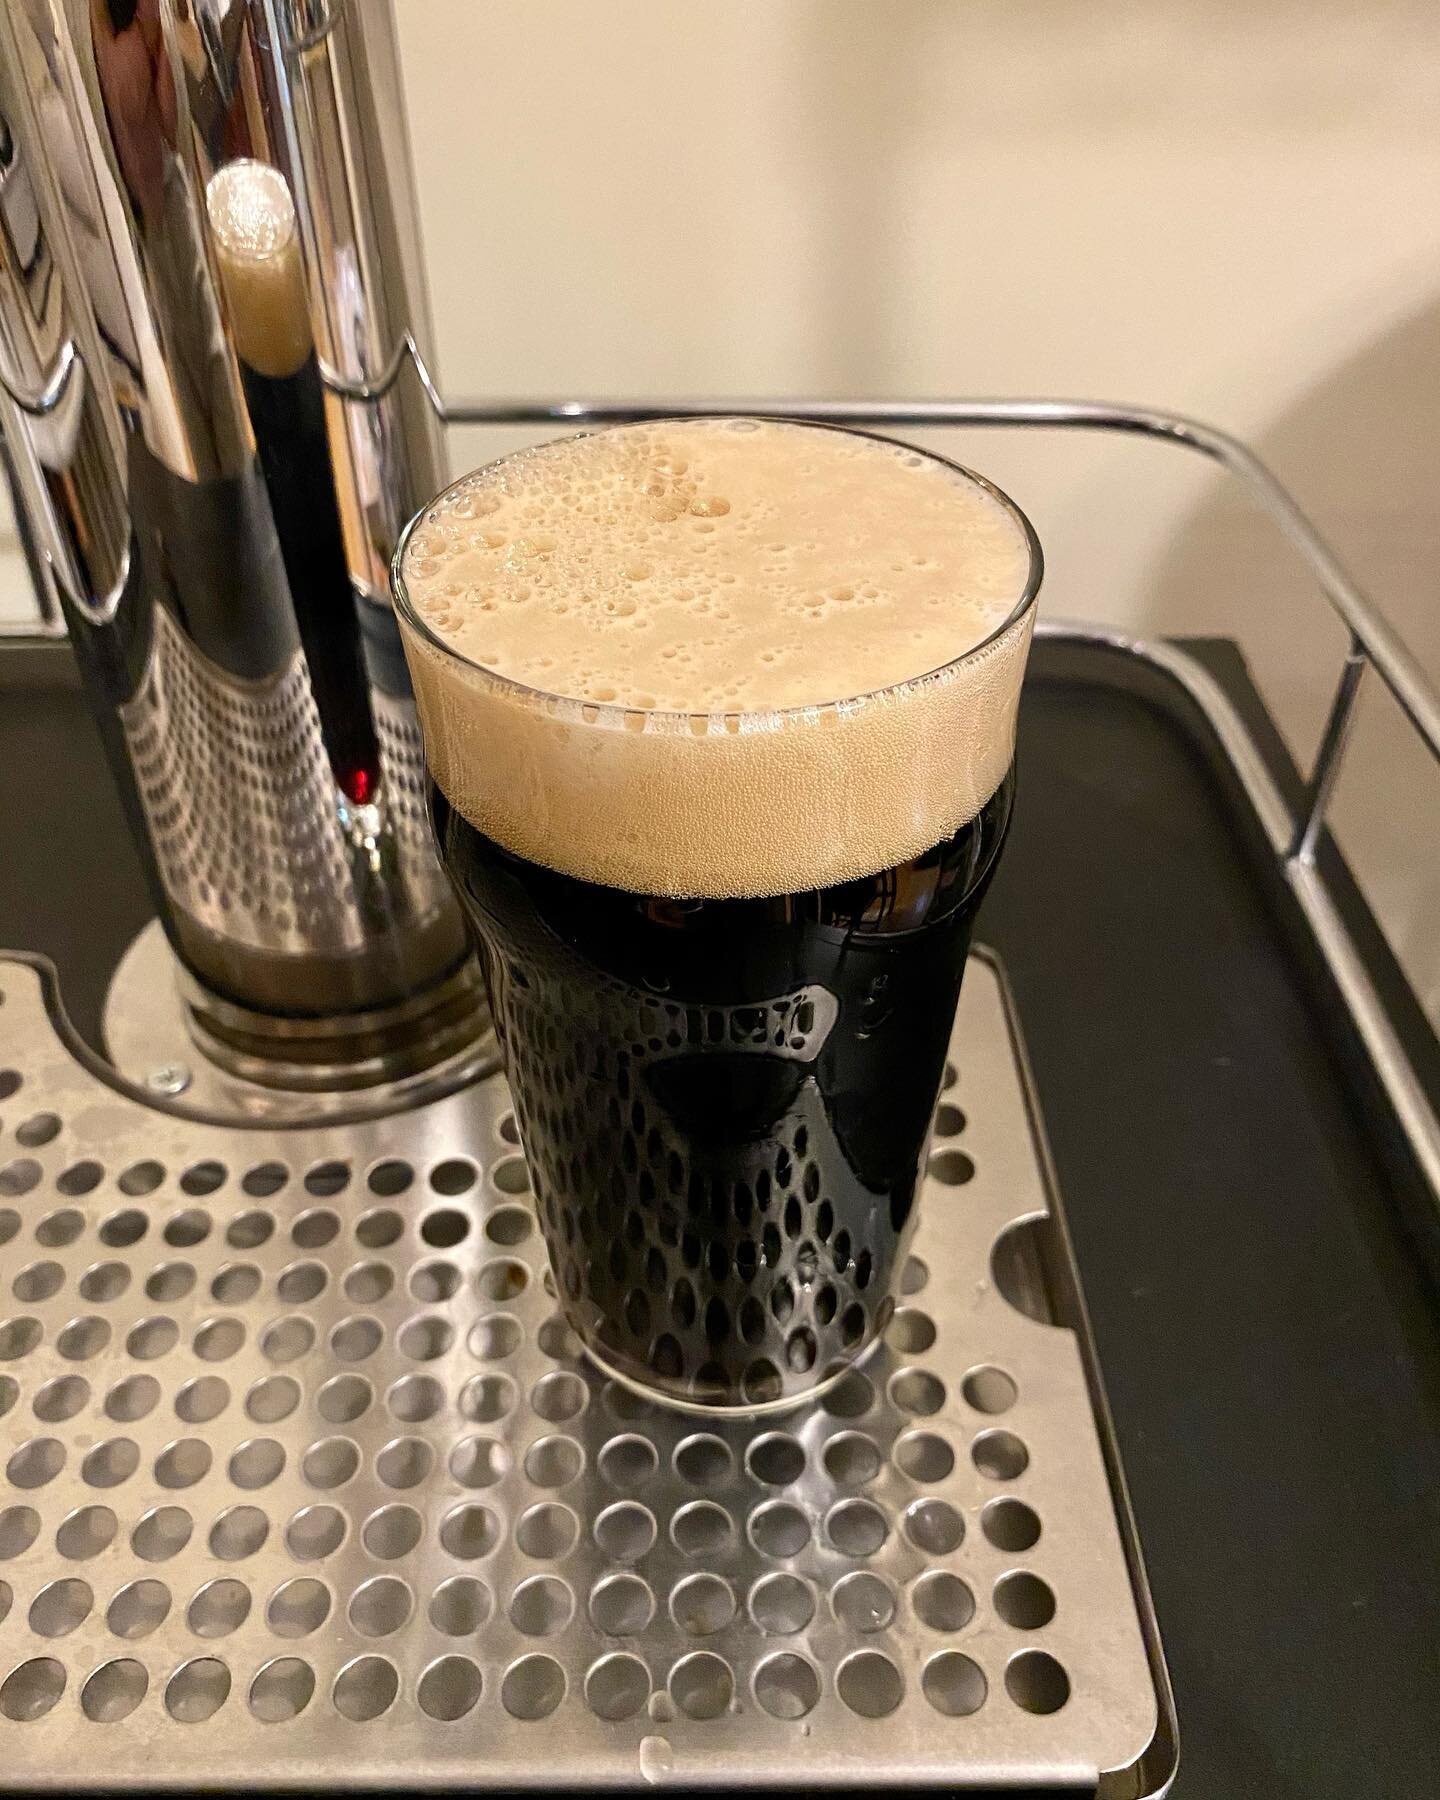 chocolate rye american stout! this is my third time brewing this and it&rsquo;s my favorite iteration by far. amarillo pairs well with the chocolate rye base for a slightly spicy orange aroma. highly carbonated to about 3 volumes, it isn&rsquo;t as h